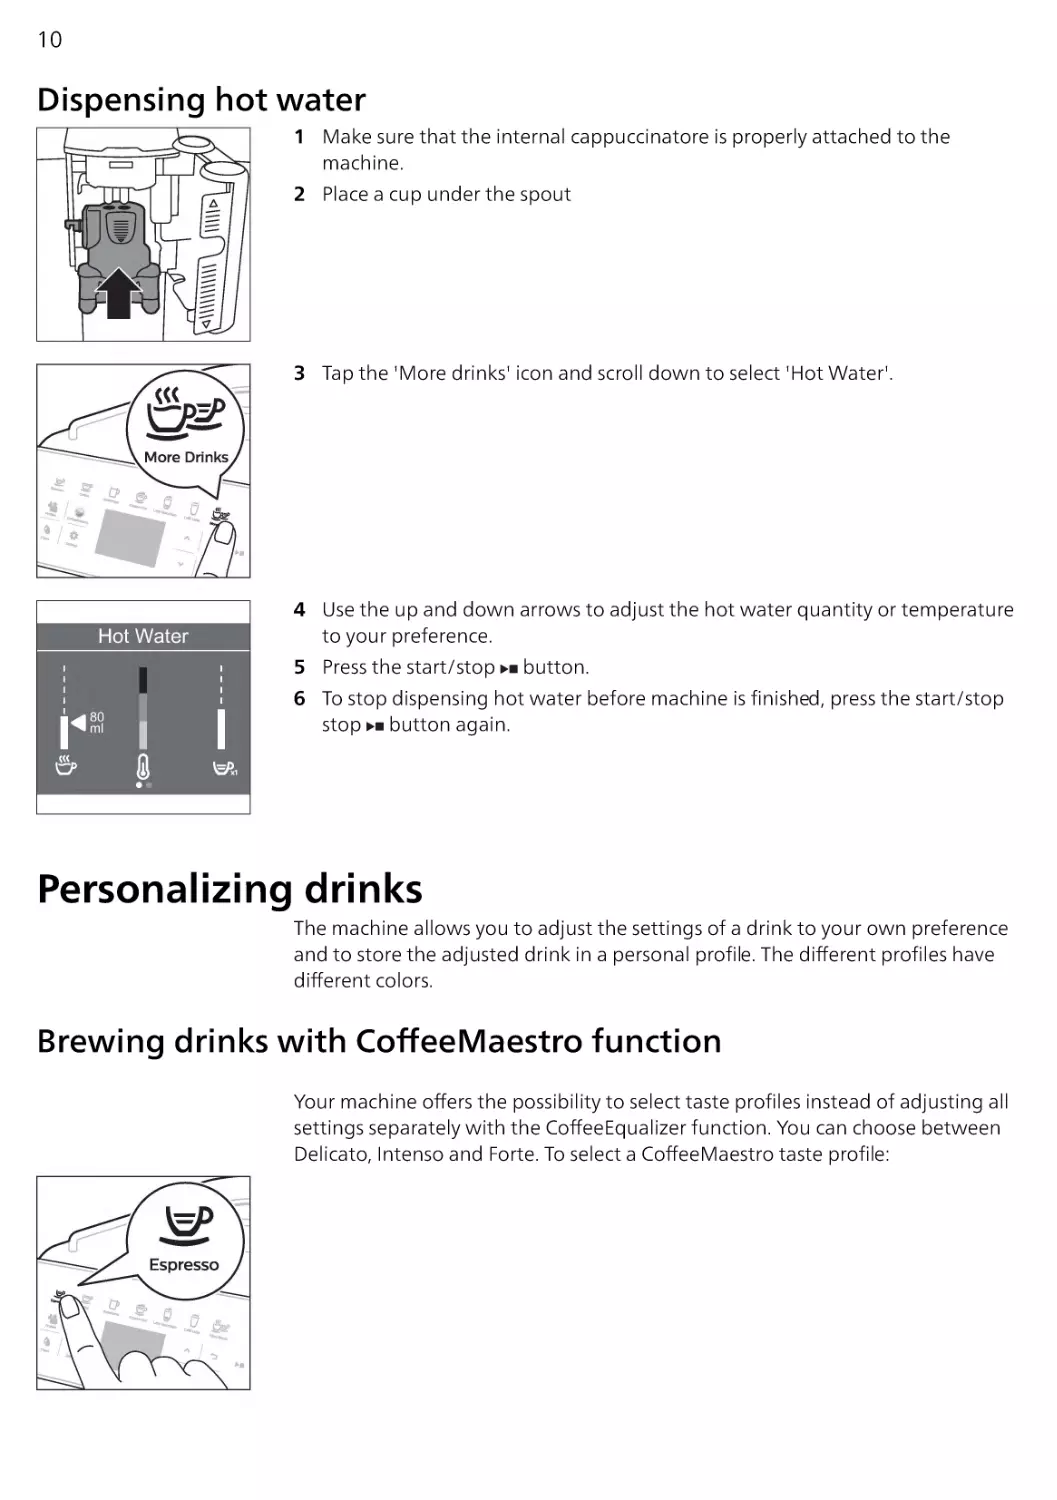 Dispensing hot water
Personalizing drinks
Brewing drinks with CoffeeMaestro function